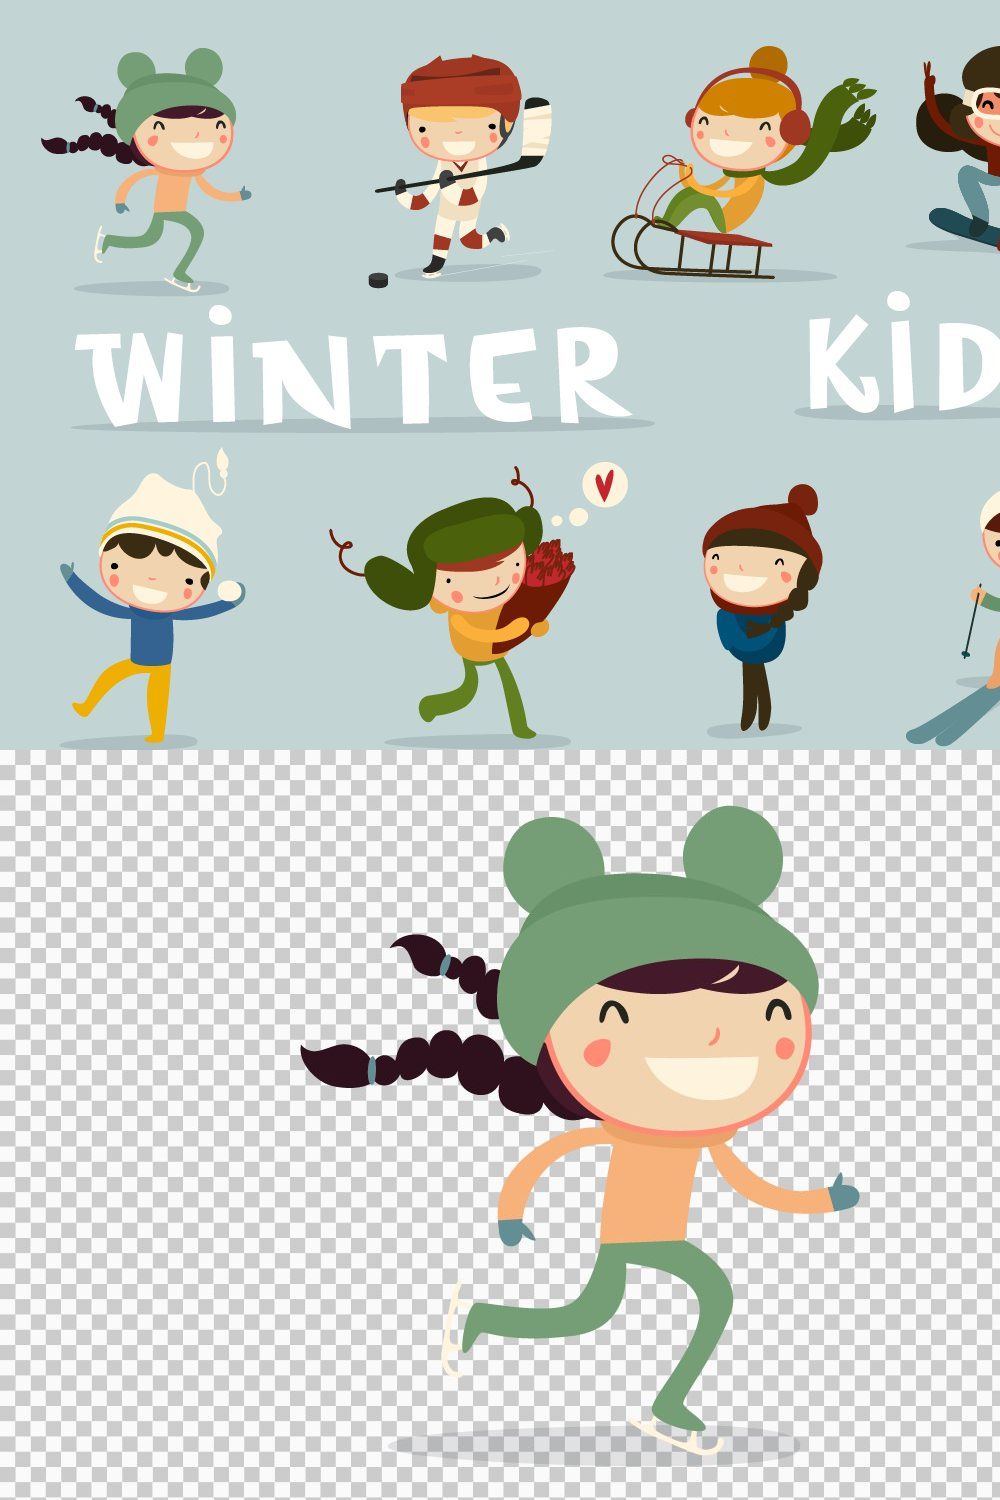 Winter kids pinterest preview image.